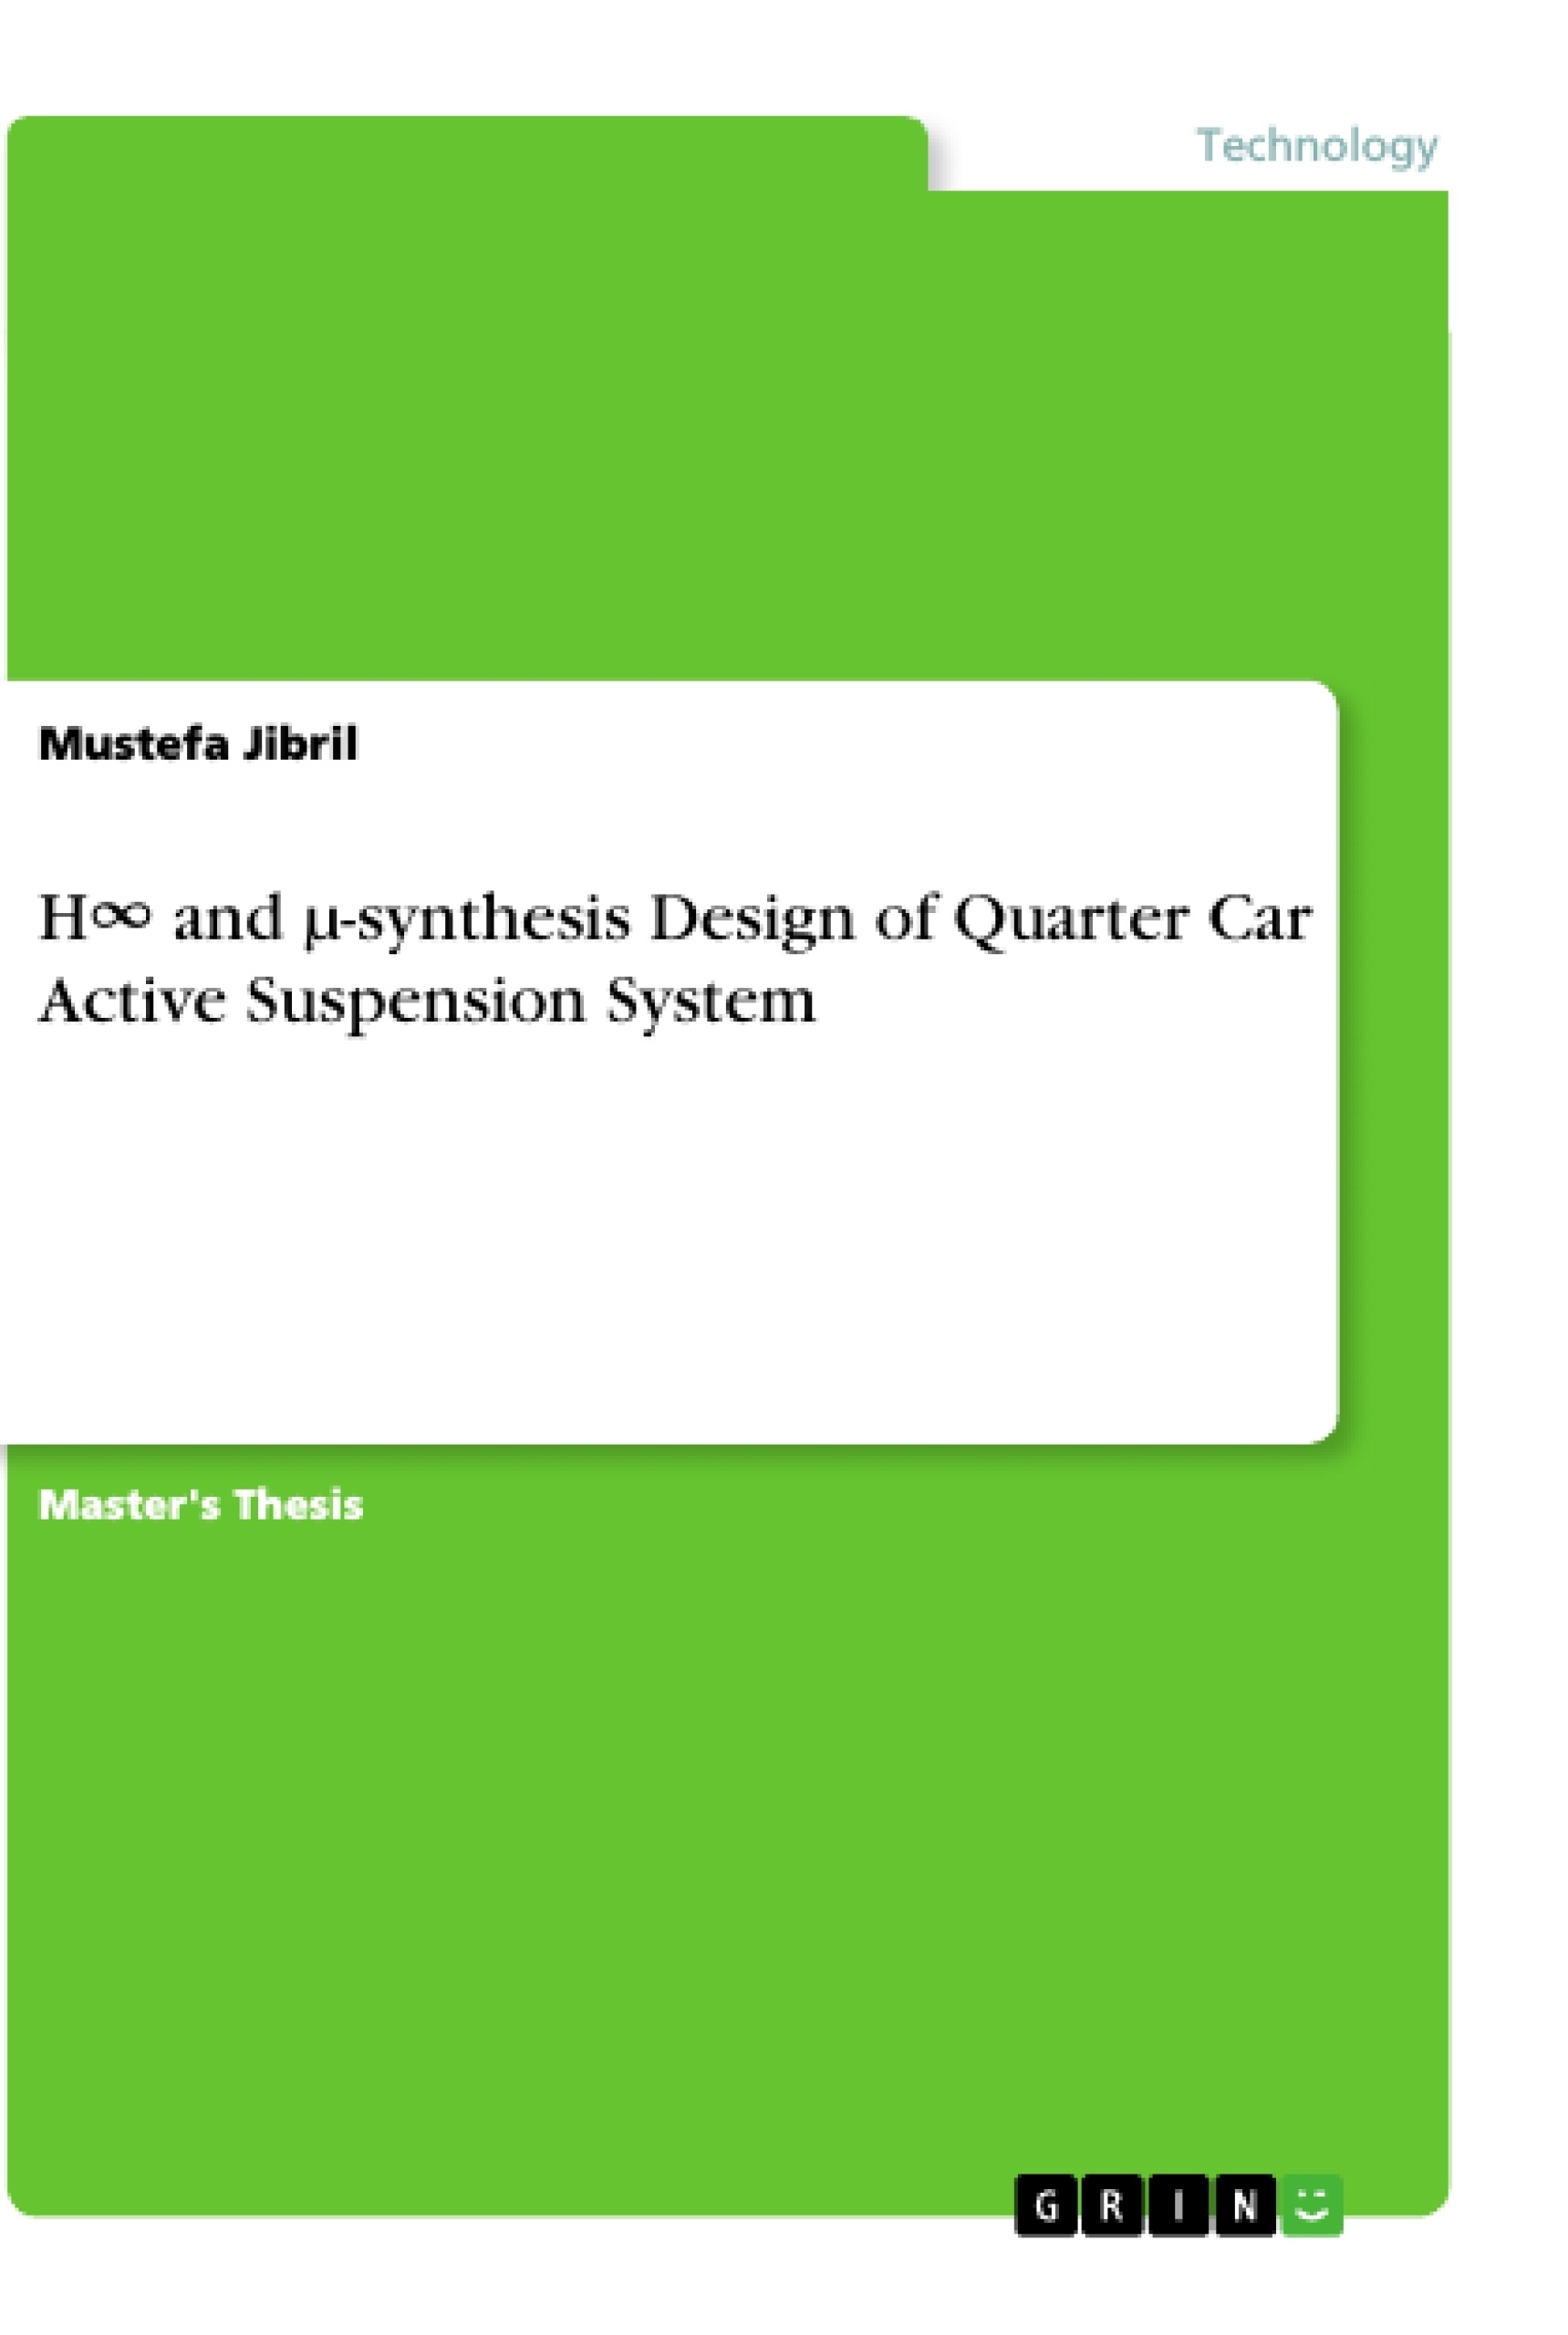 Título: H∞ and µ-synthesis Design of Quarter Car Active Suspension System